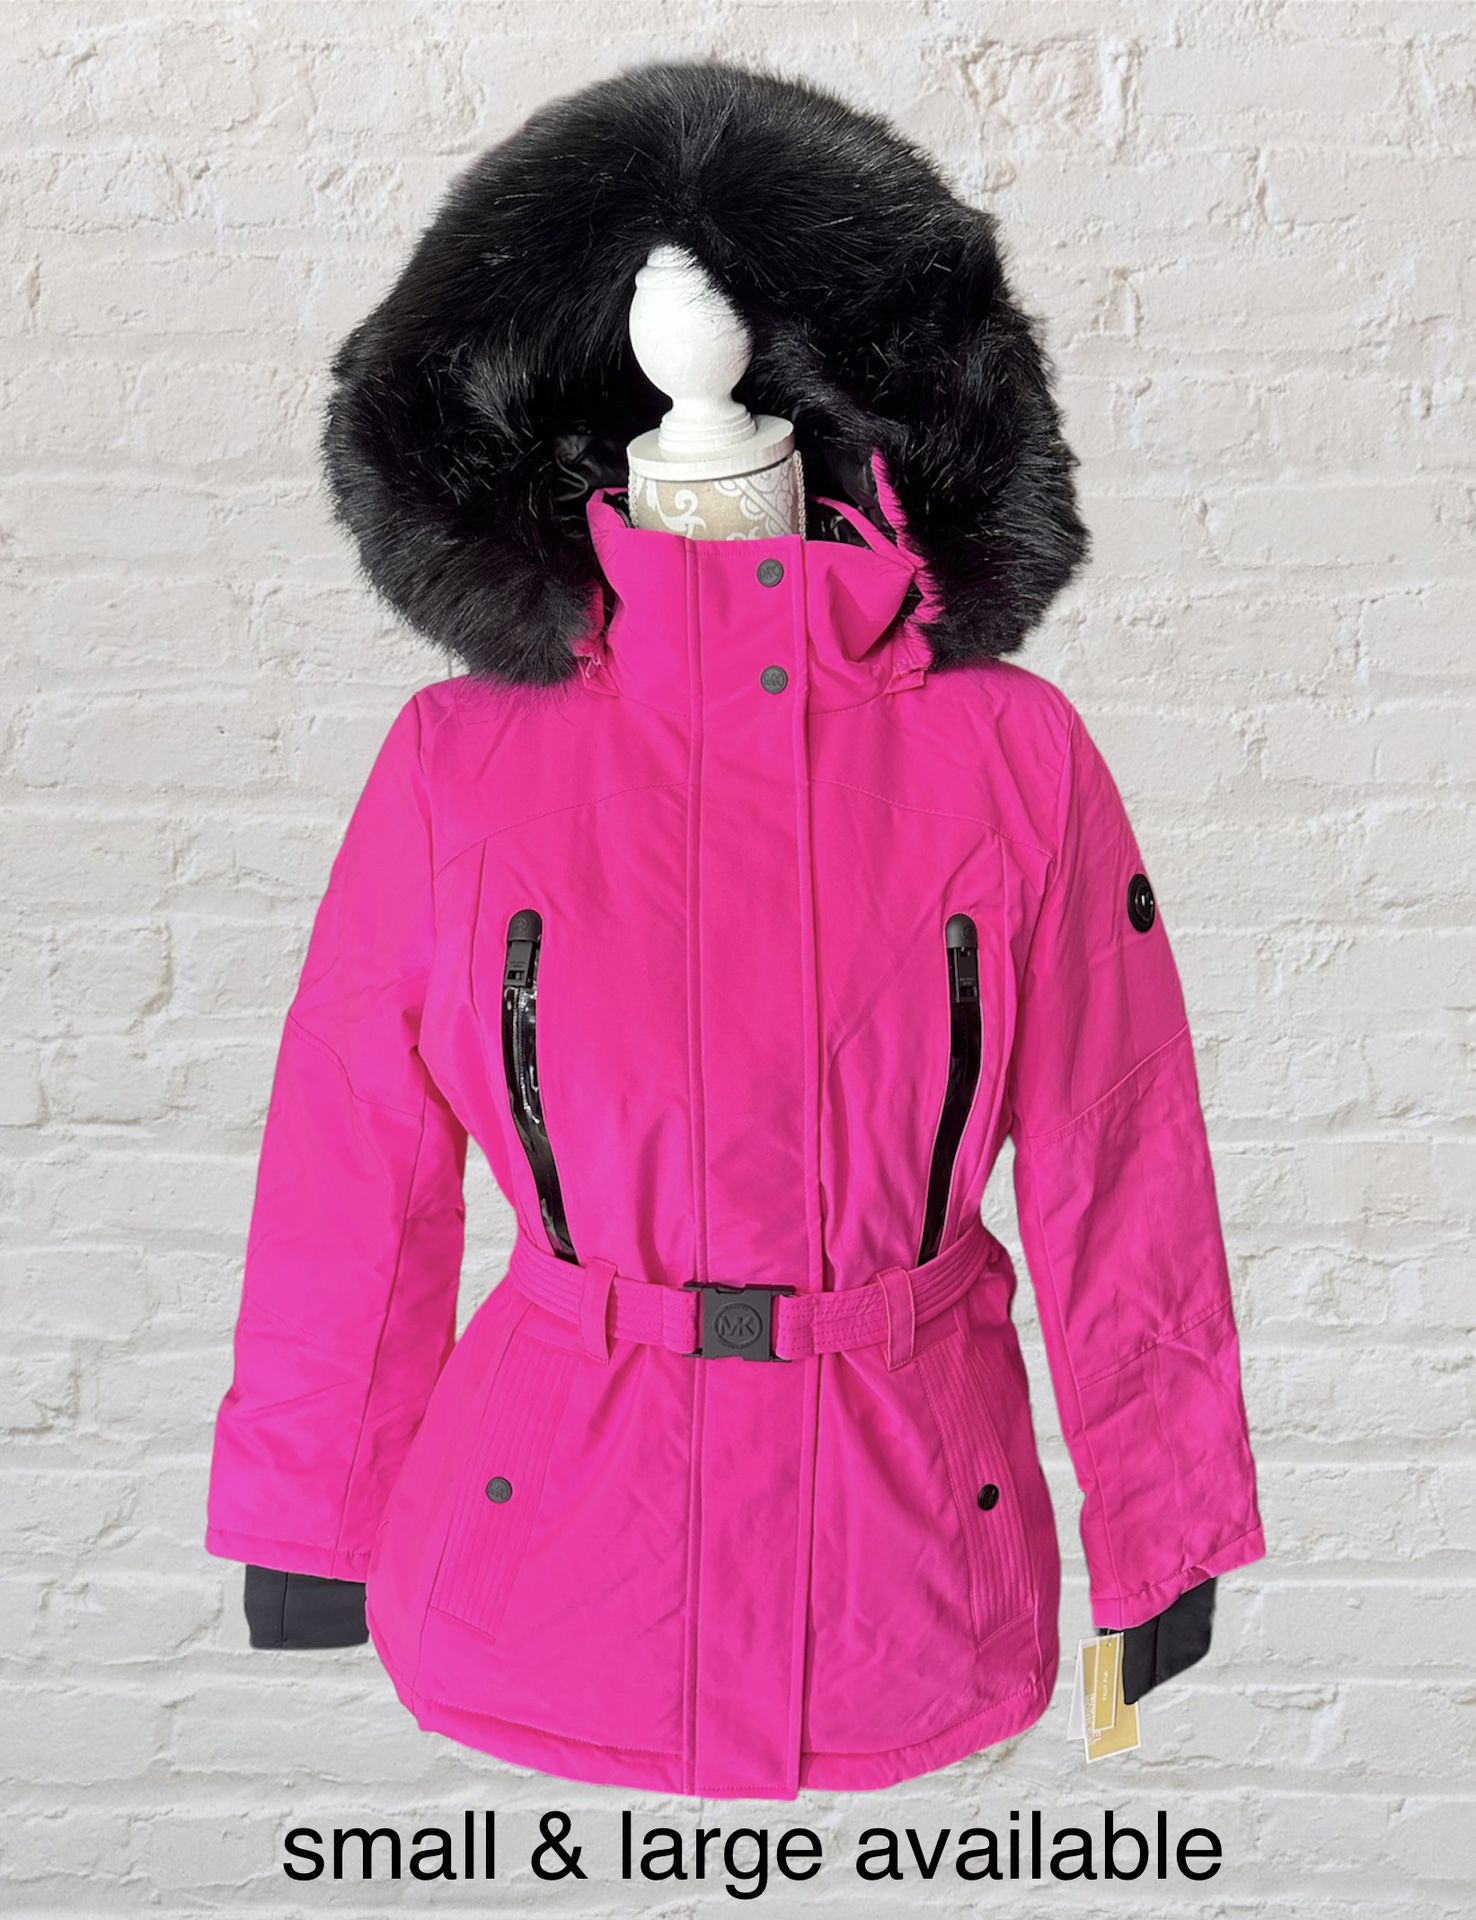 Michael kors pink coat jacket with removable Hoodie